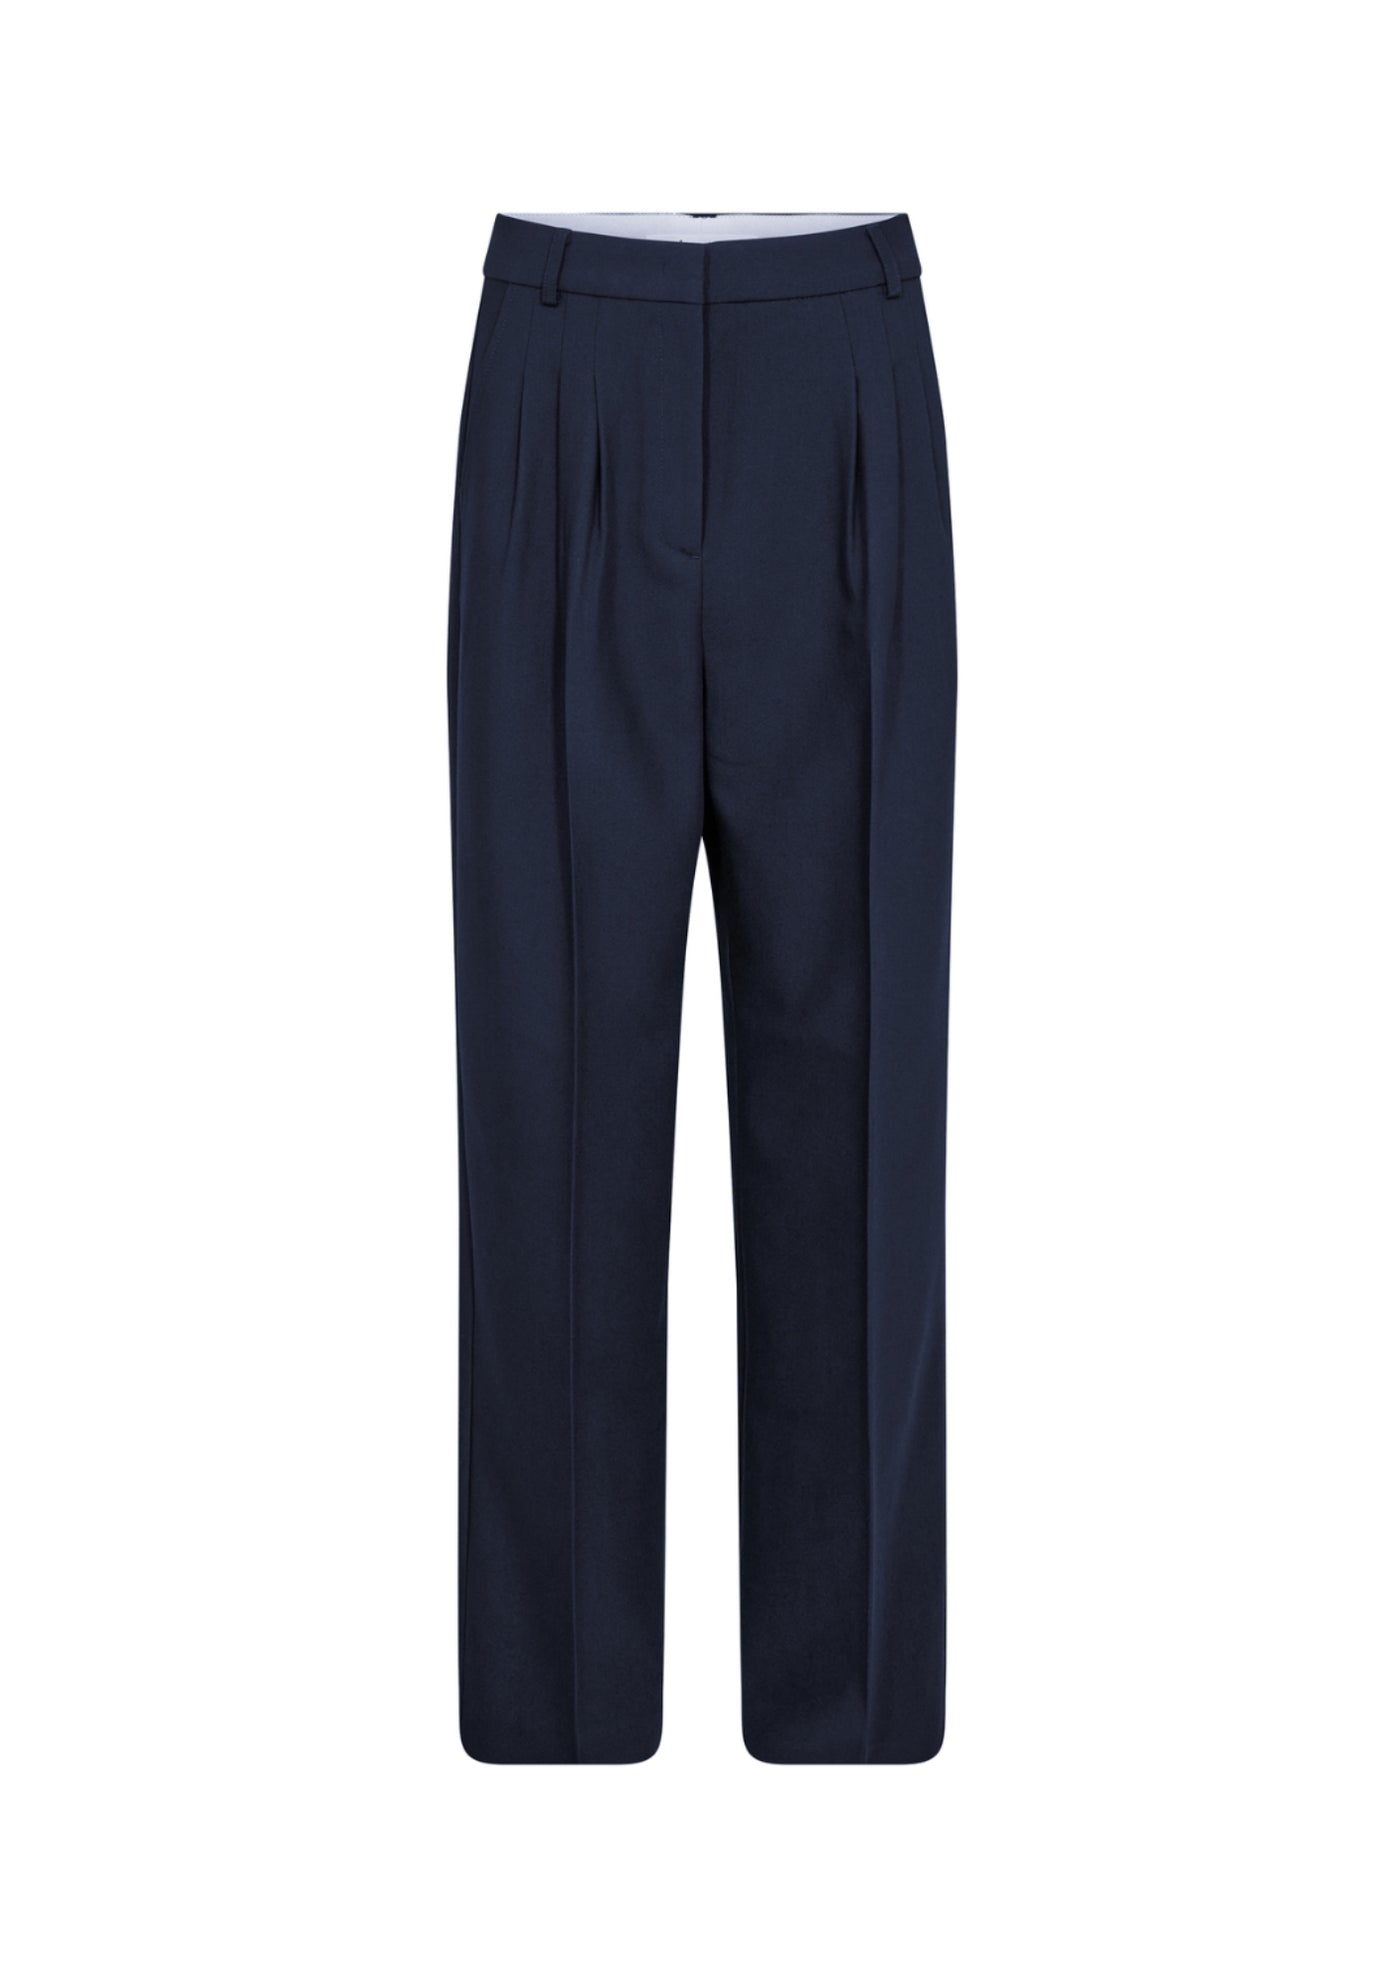 Co' Couture | VolaCC Long Pleat Pant Navy